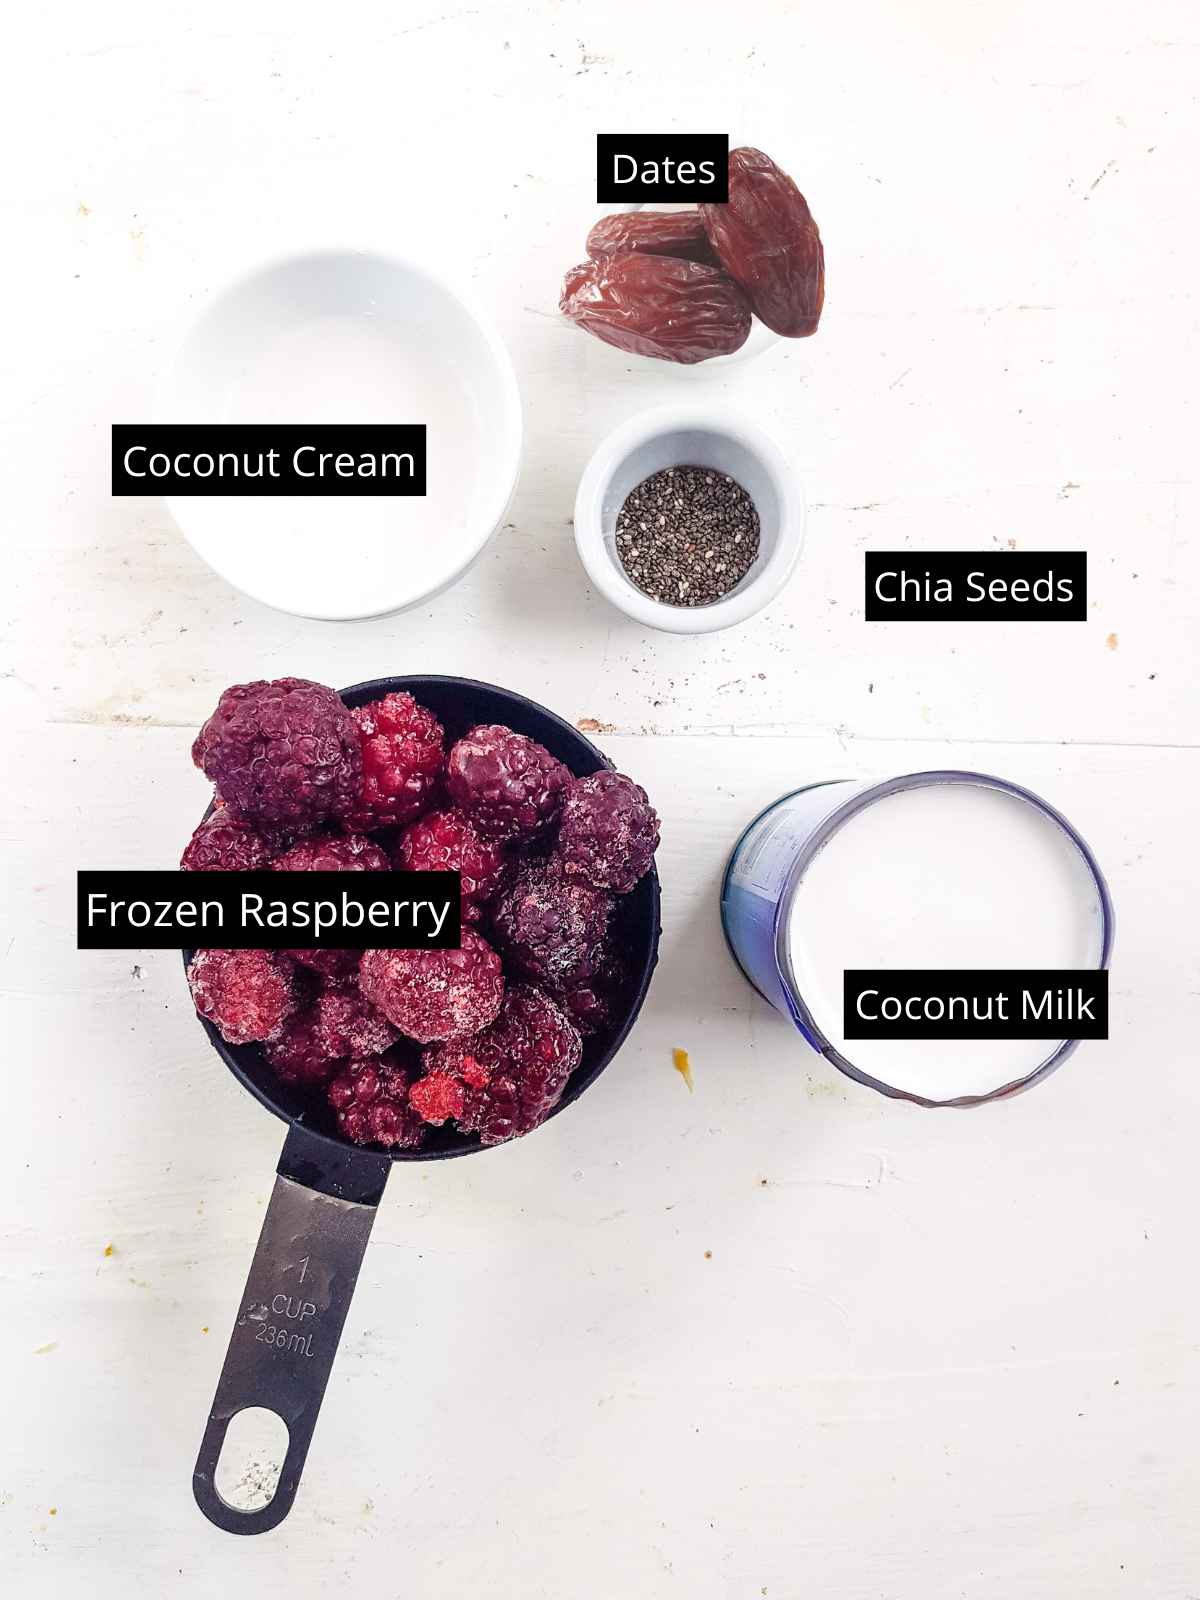 Ingredients to make coconut milk high calorie smoothie.